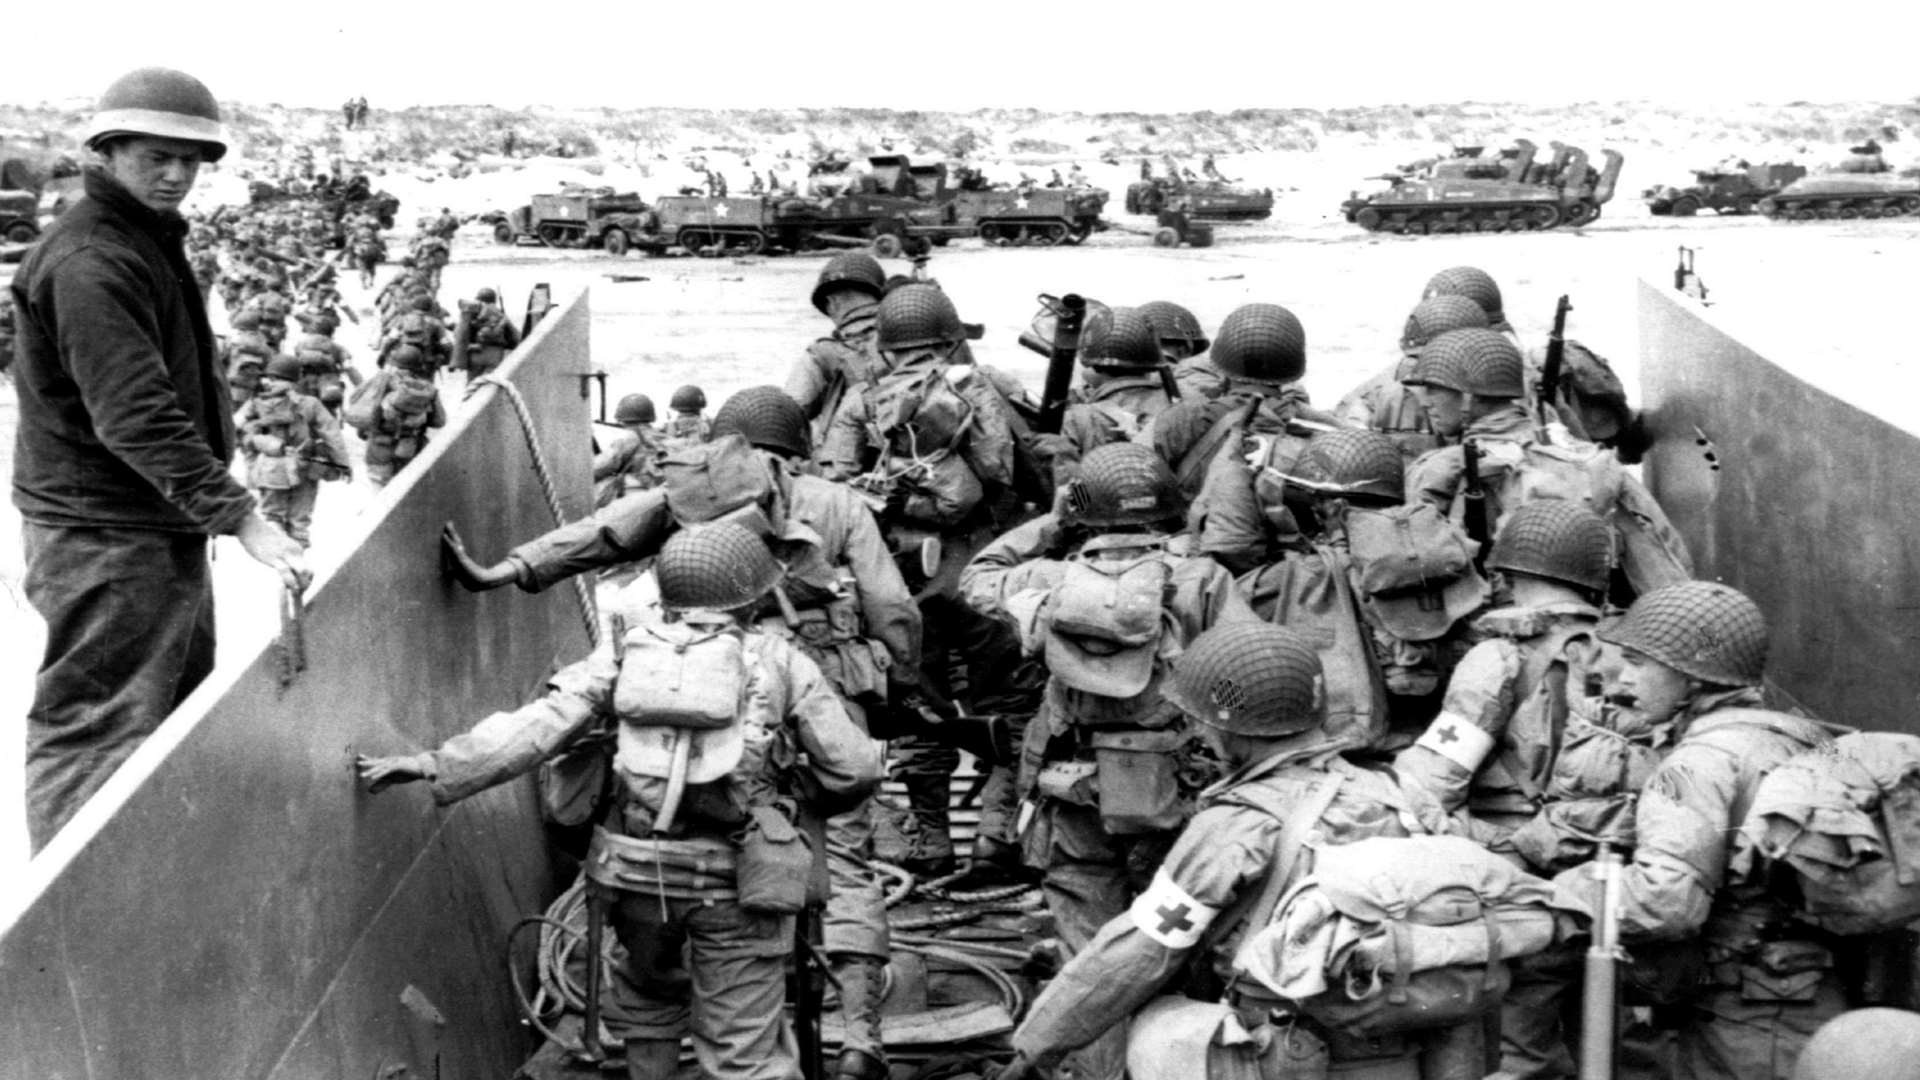 US Army soldiers disembark from a landing craft during the Normandy landings (D-Day)